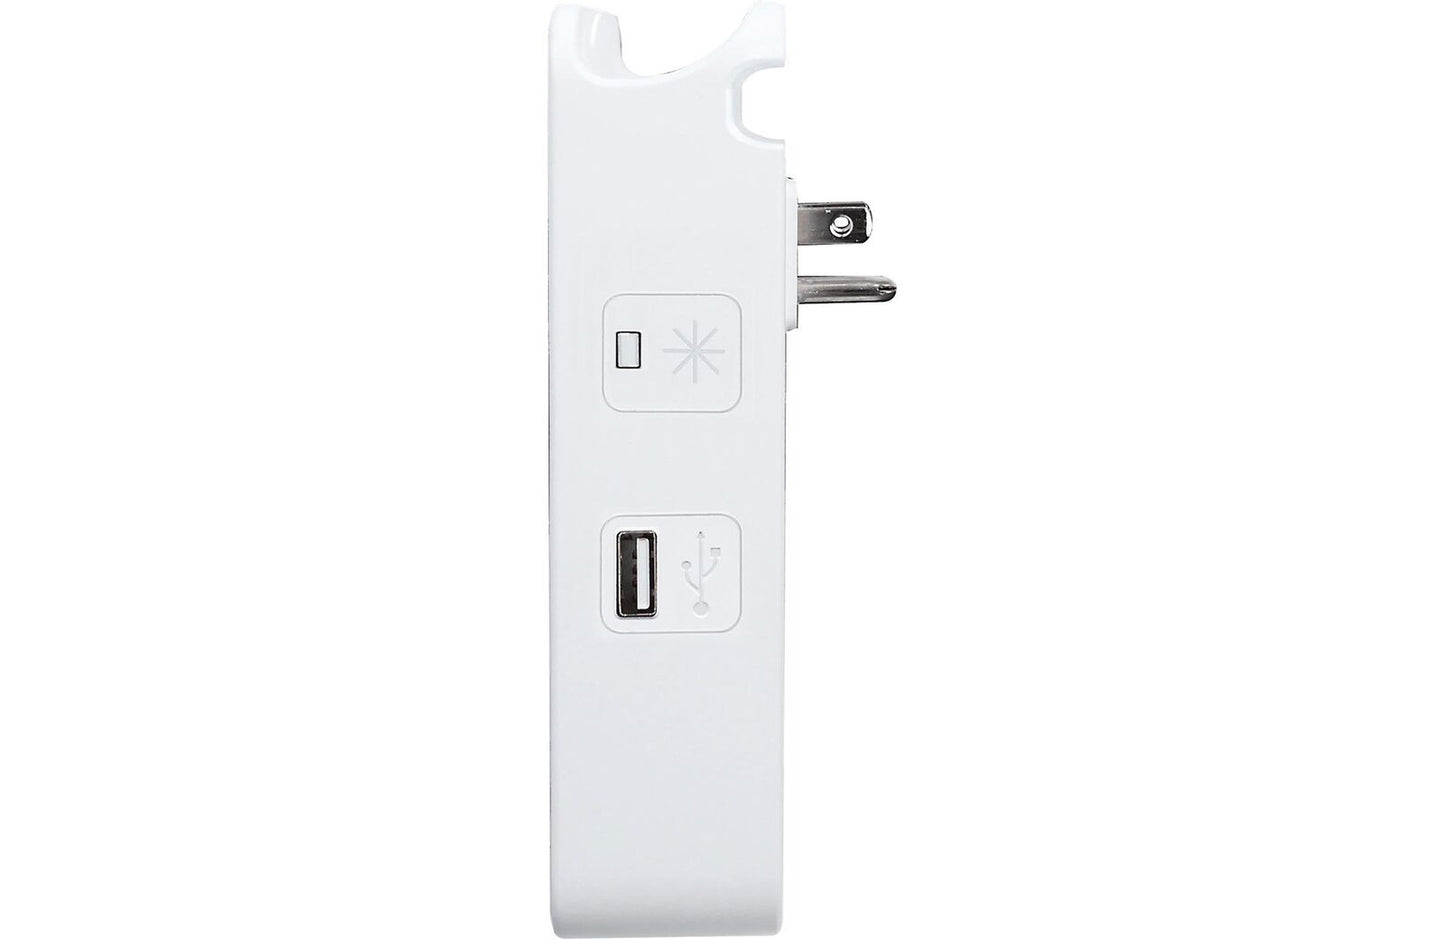 Panamax P360-Dock Power360 Space-saving surge protector with built-in USB chargi